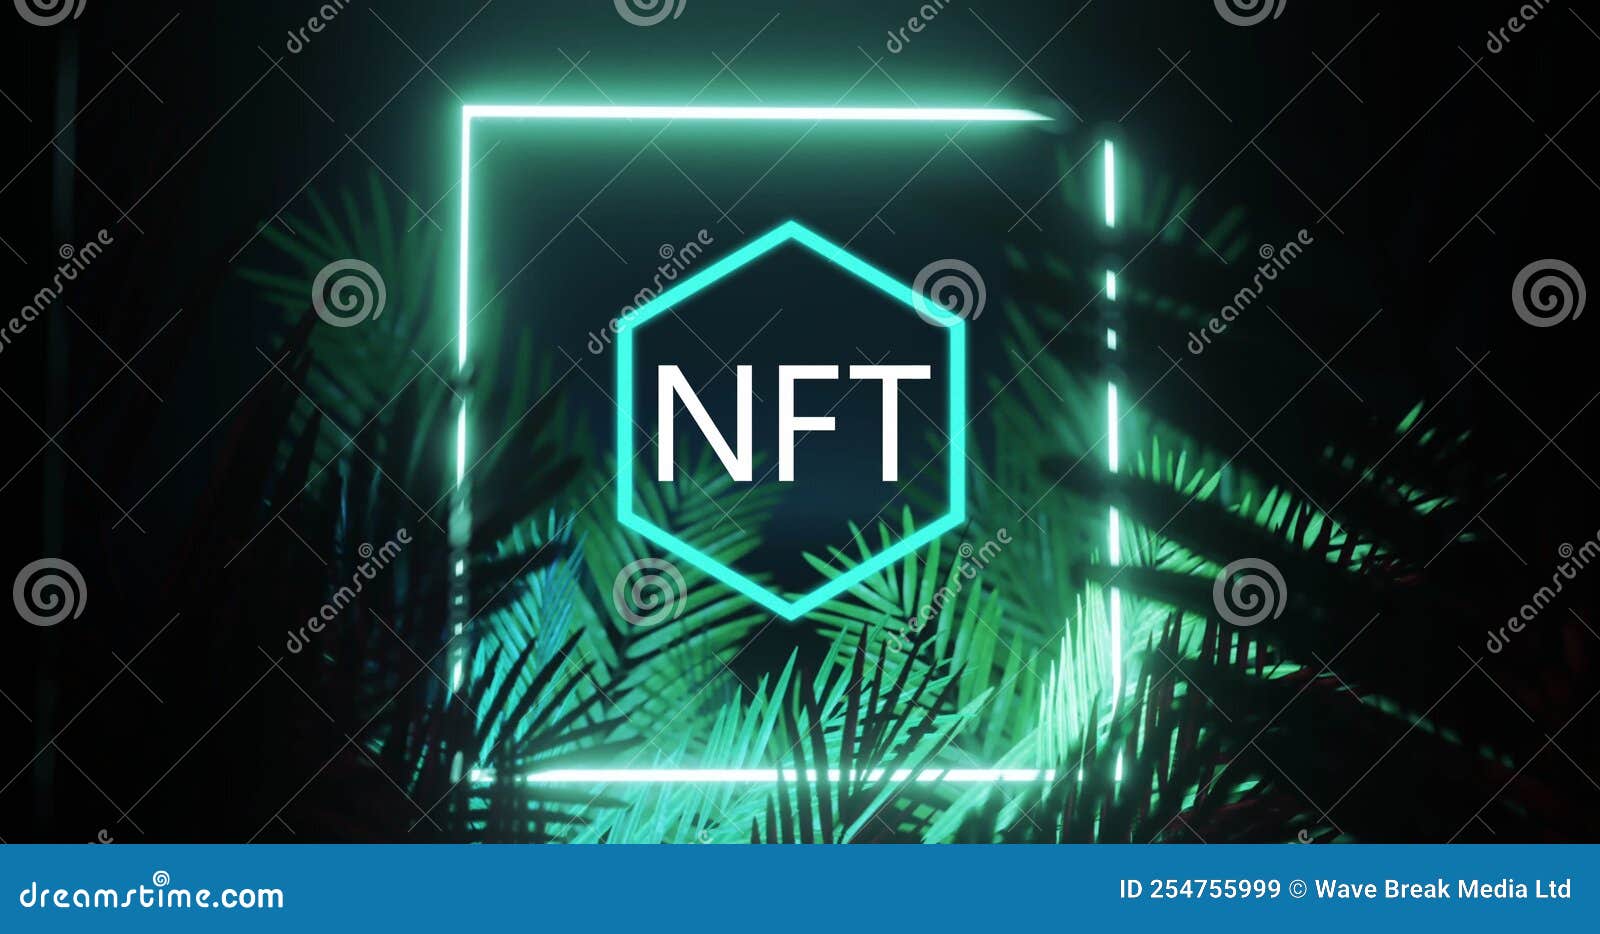 image of nft  and square in blue neon, over palm leaves on black background